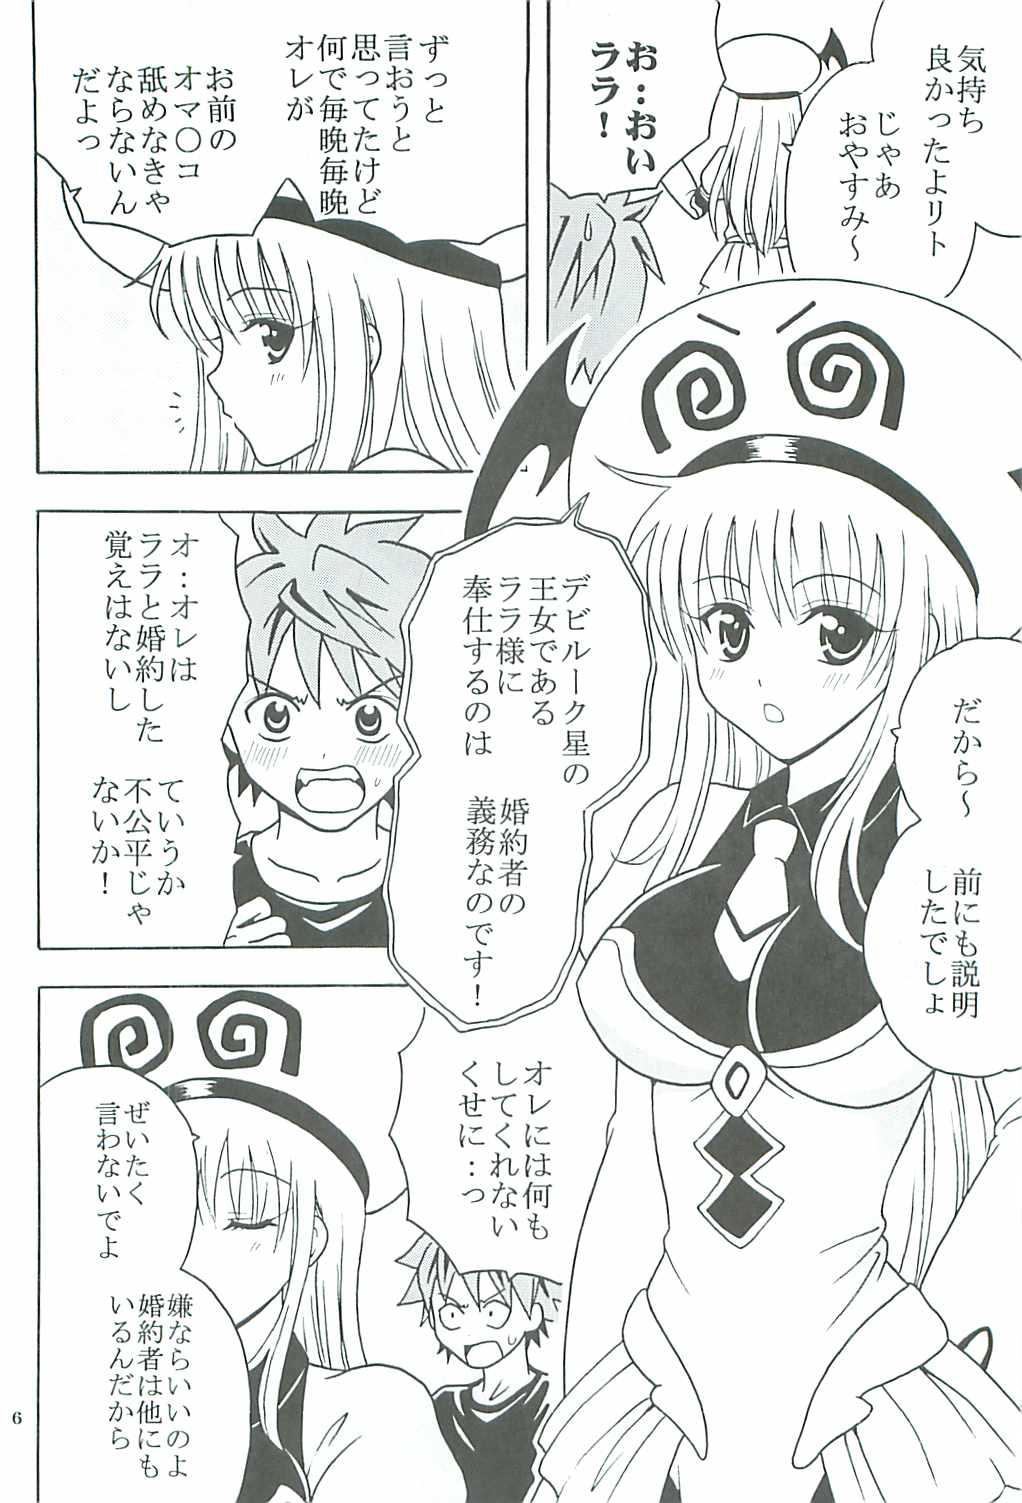 Indian ToLOVE Ryu 2 - To love ru Cutie - Page 7